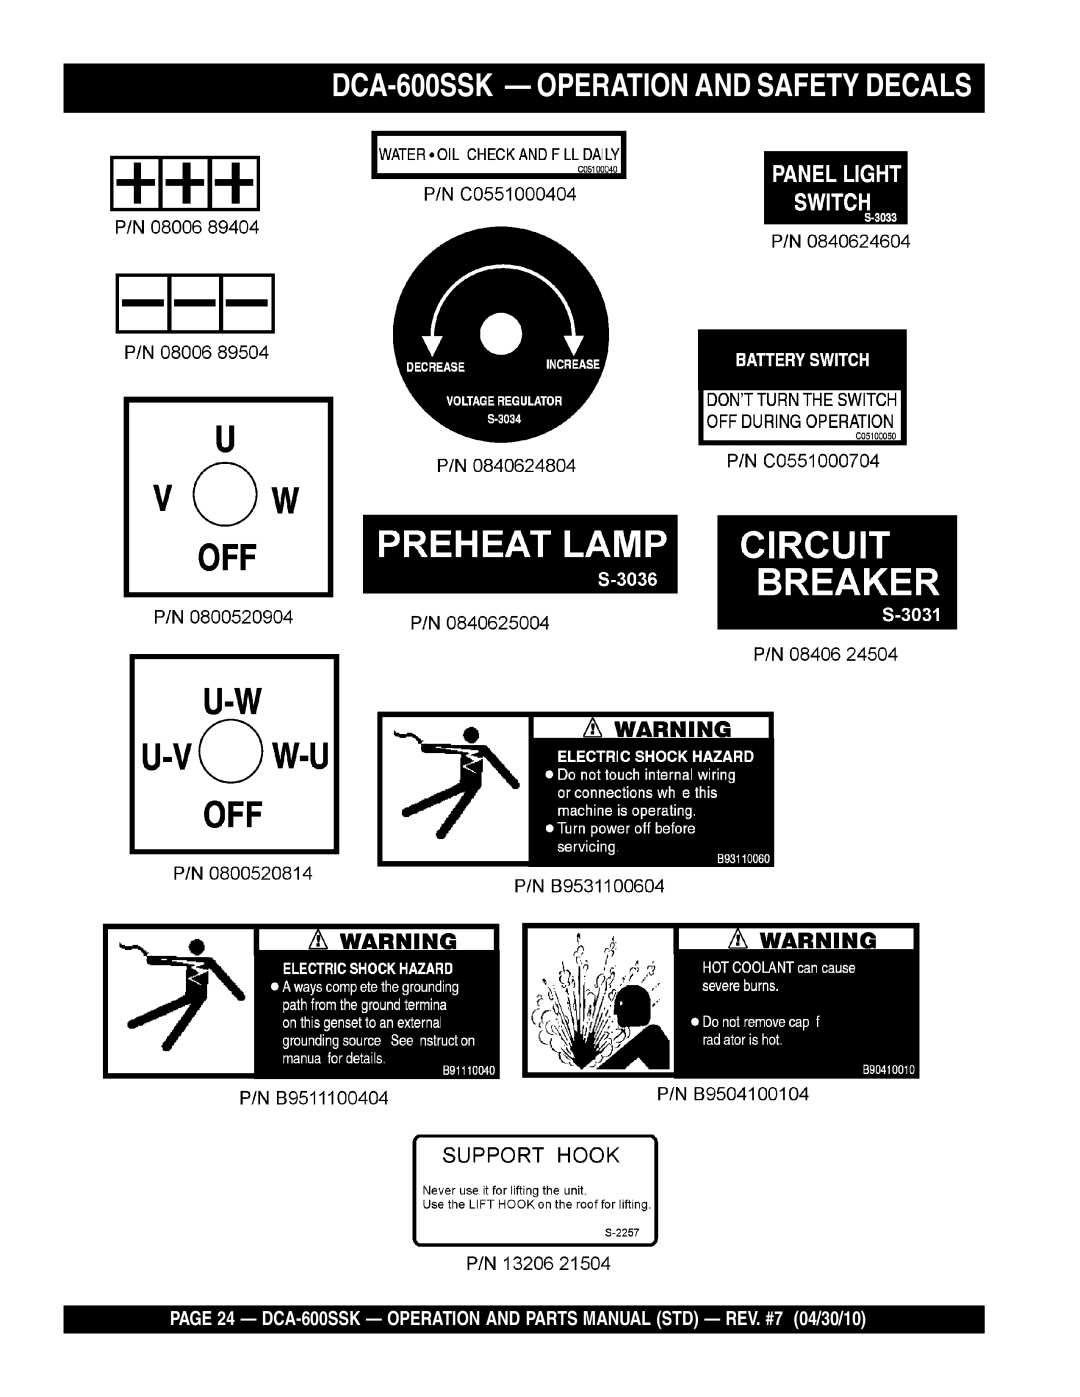 Multiquip operation manual DCA-600SSK - OPERATION AND SAFETY DECALS 